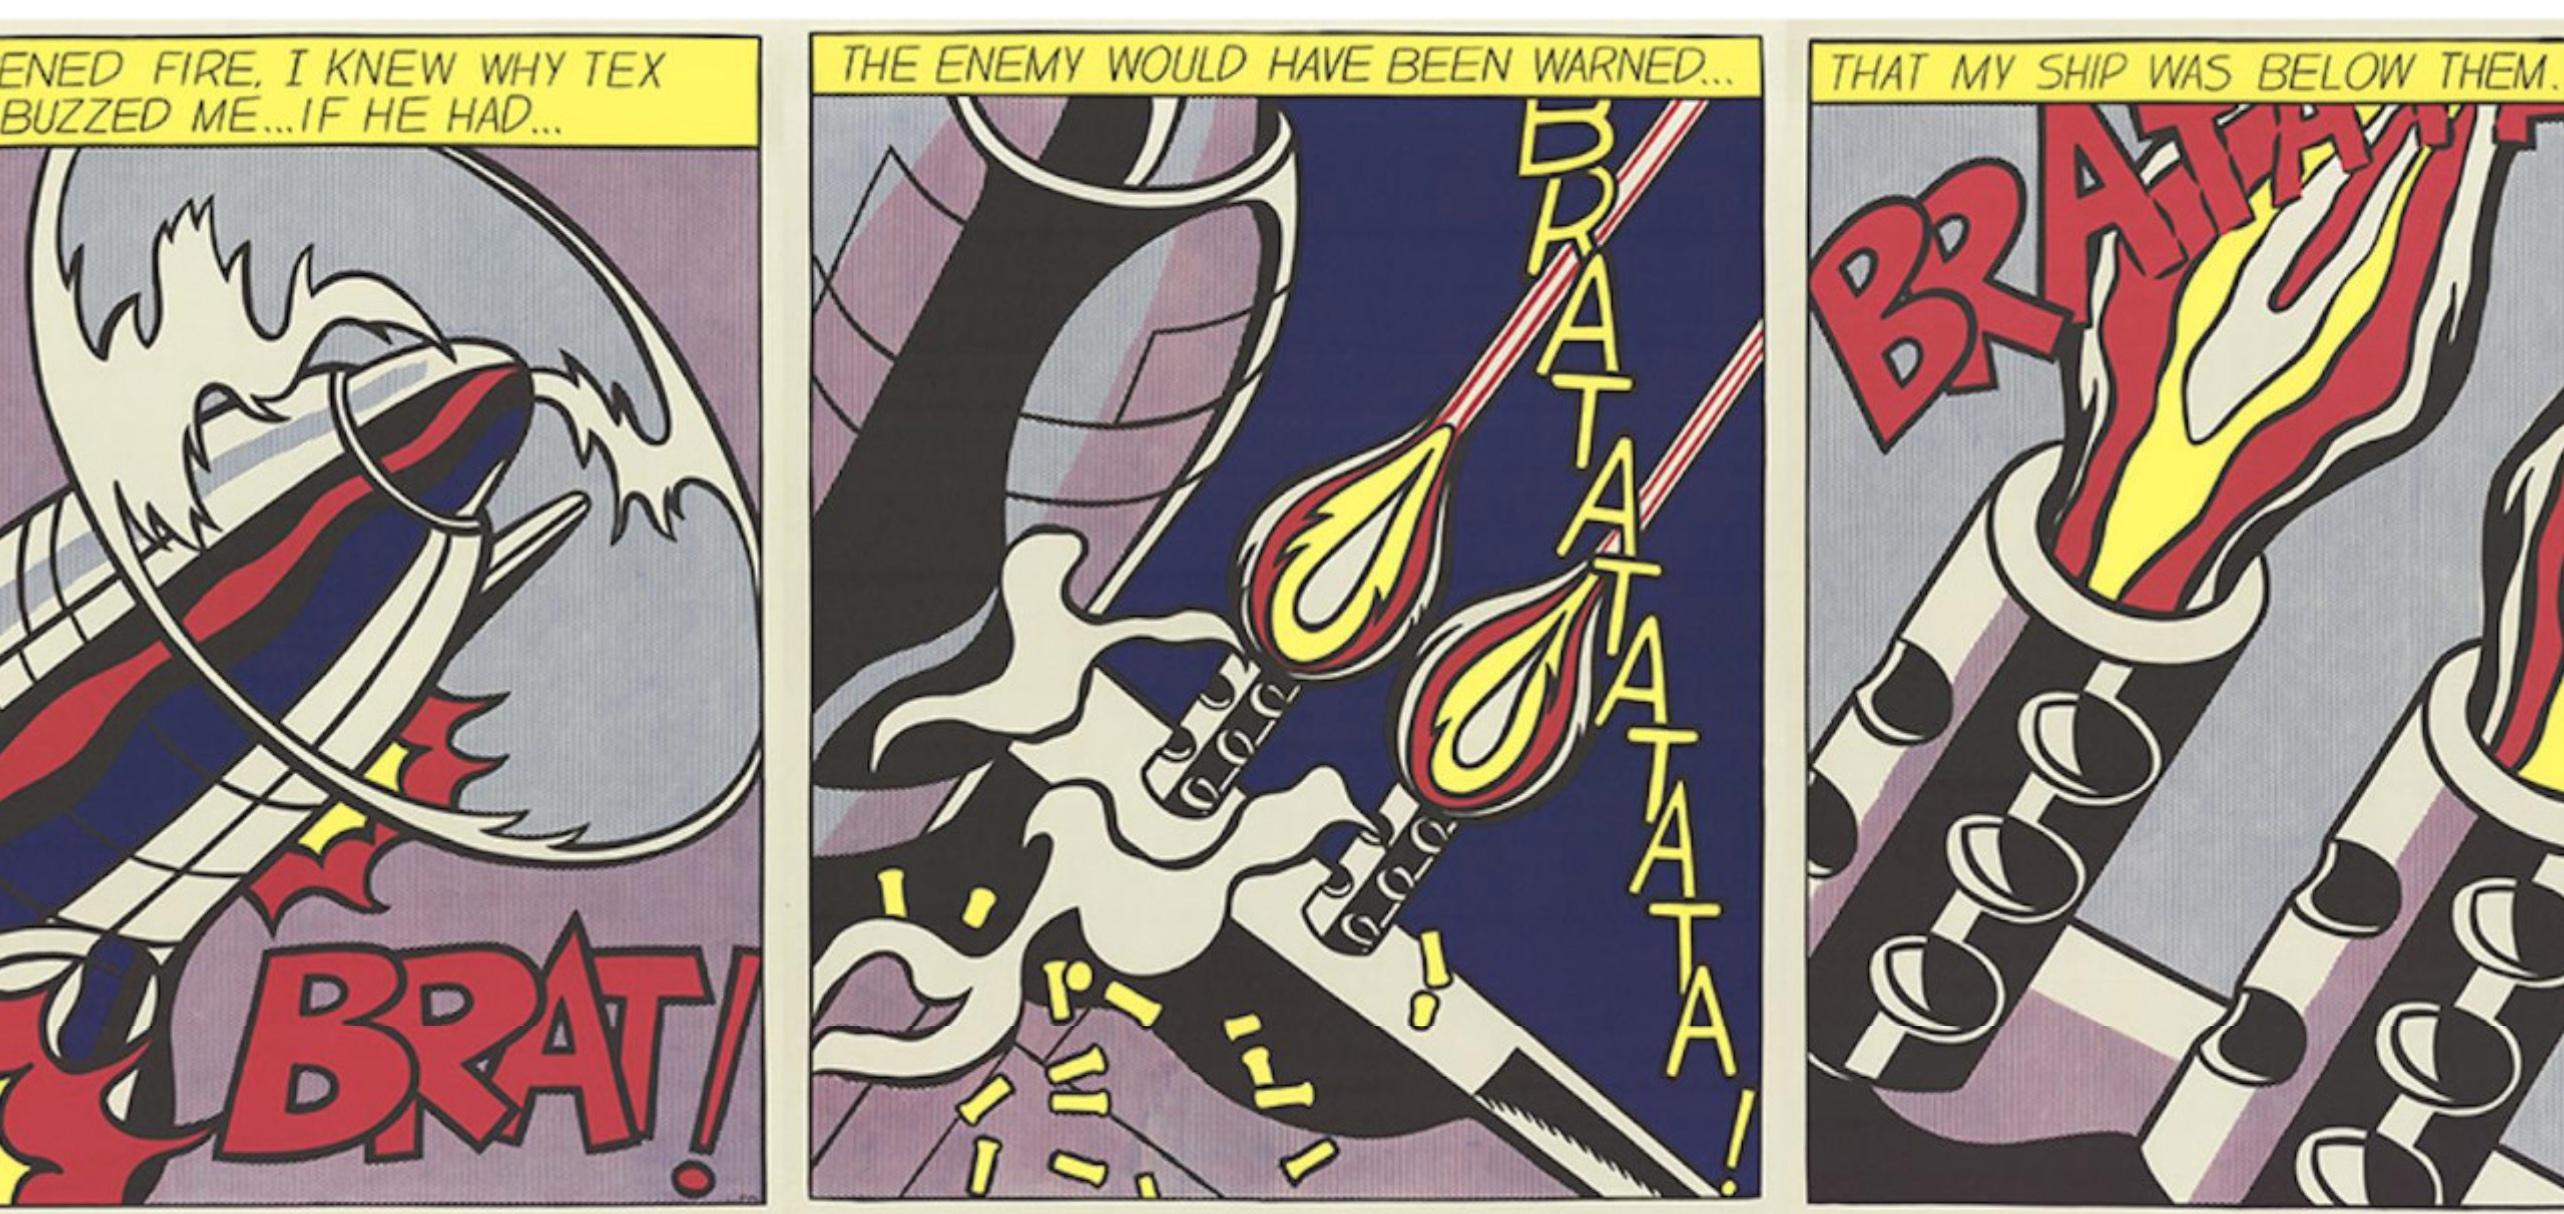 As I Opened Fire (Triptych) - Print by Roy Lichtenstein